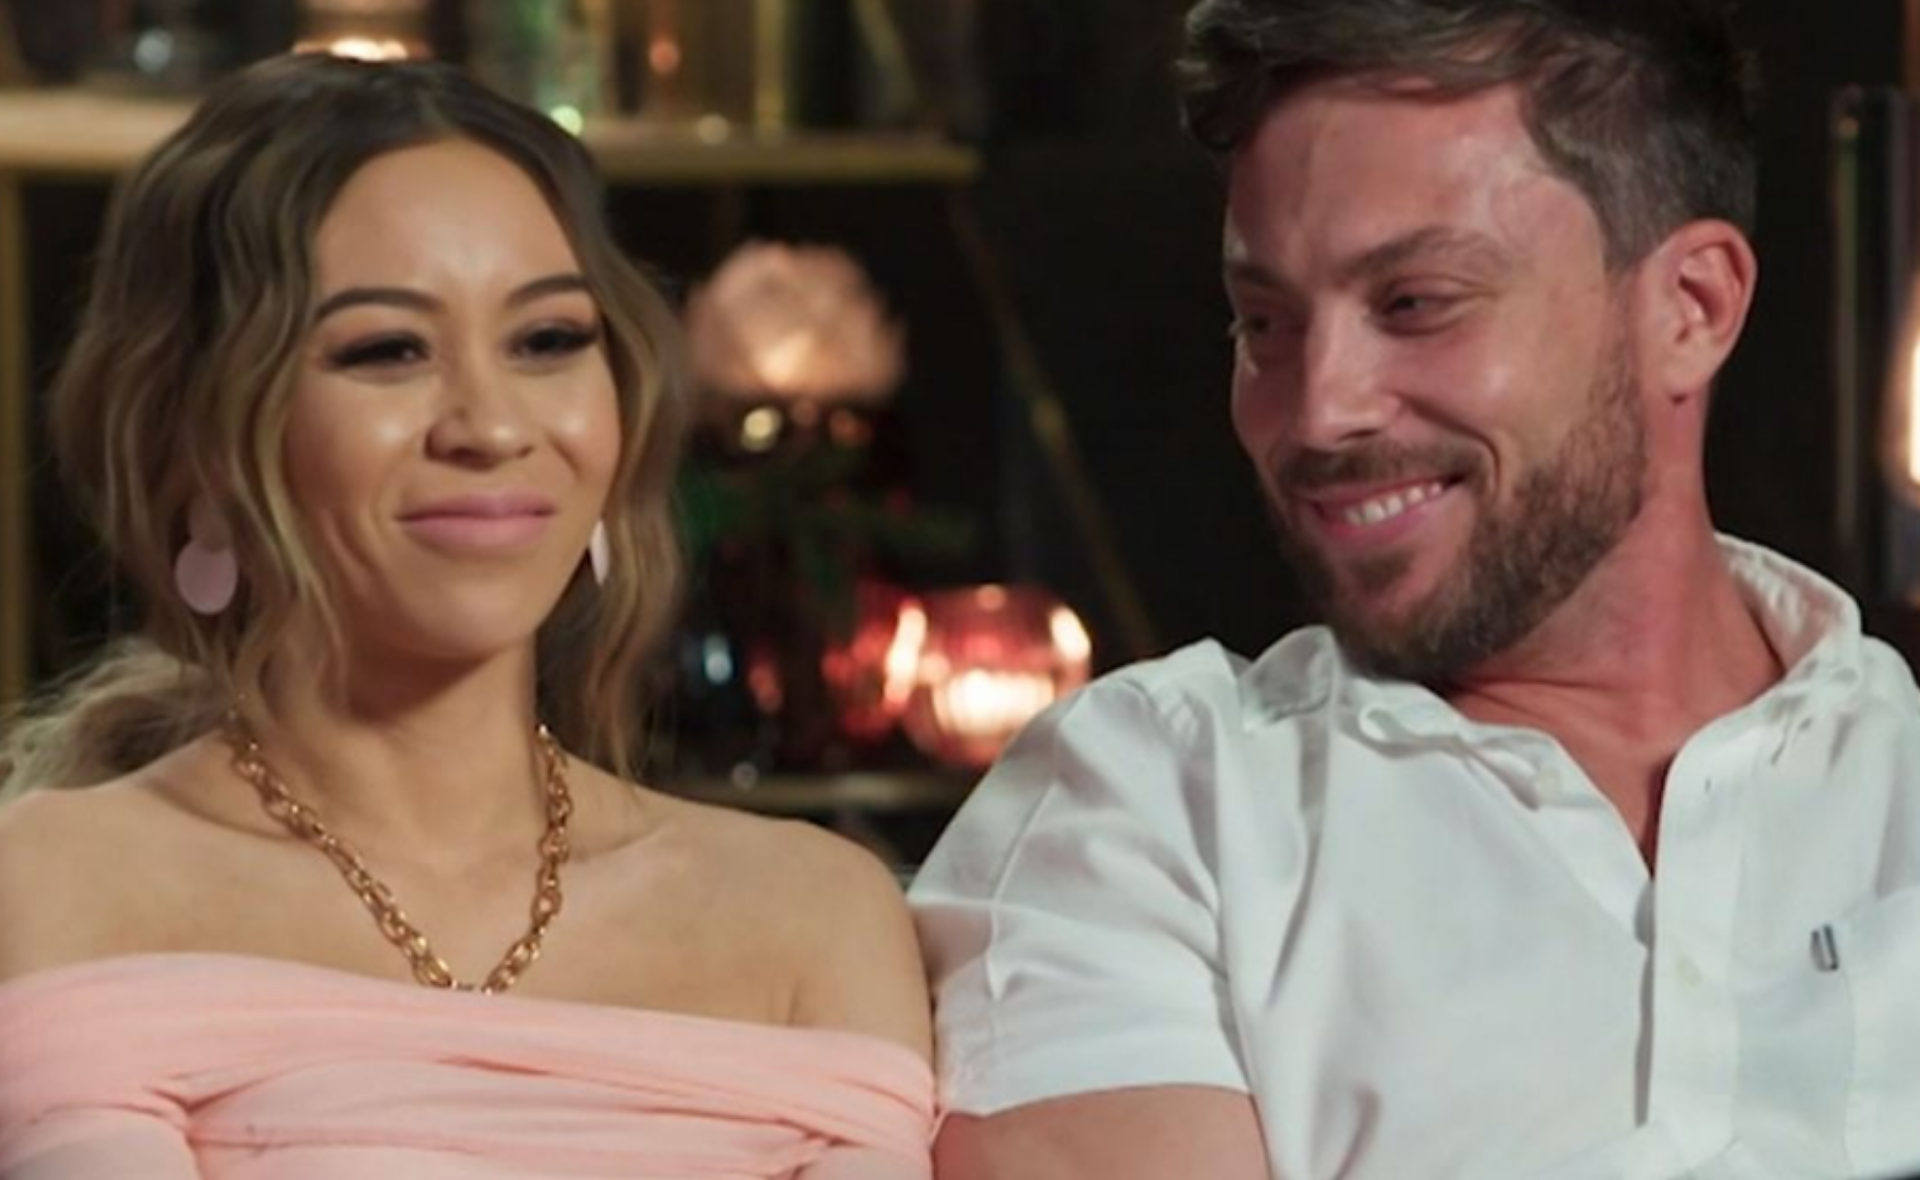 From sizzling chemistry to fiery fights: Are Married At First Sight’s Jason and Alana still together?